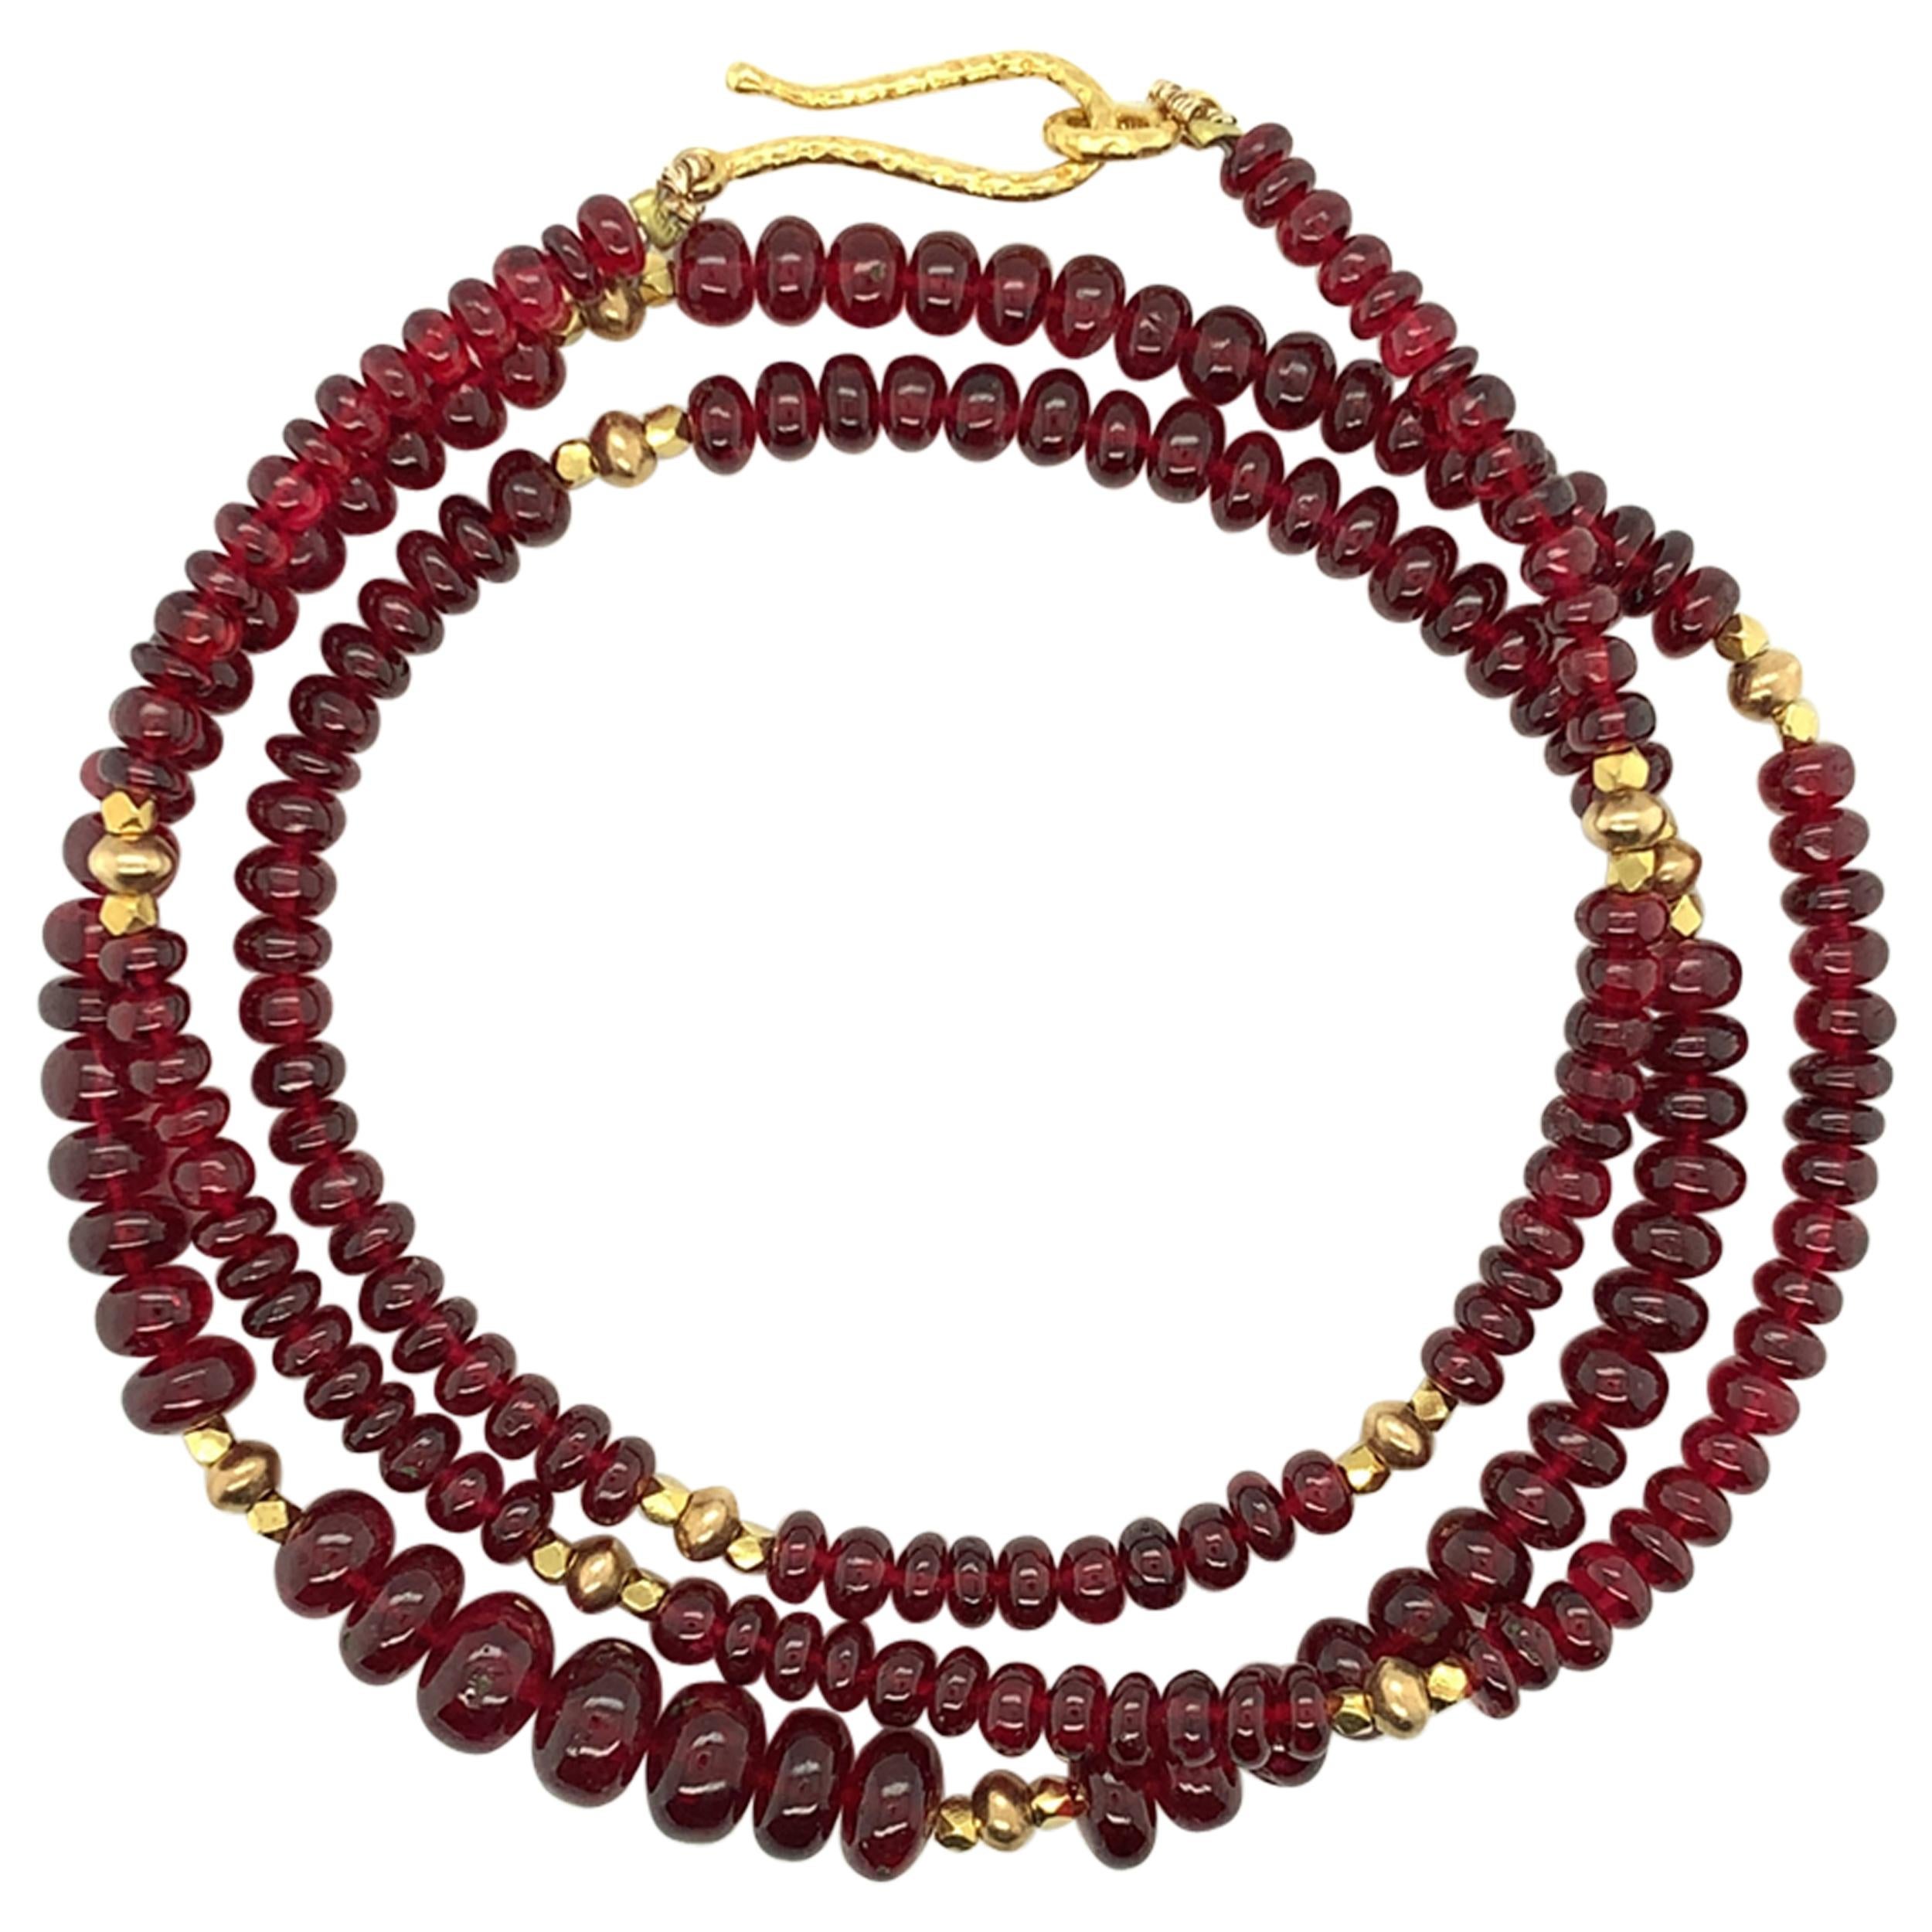 Red Spinel Bead Graduated Strand Necklace with Yellow Gold Spacers, 21 Inches